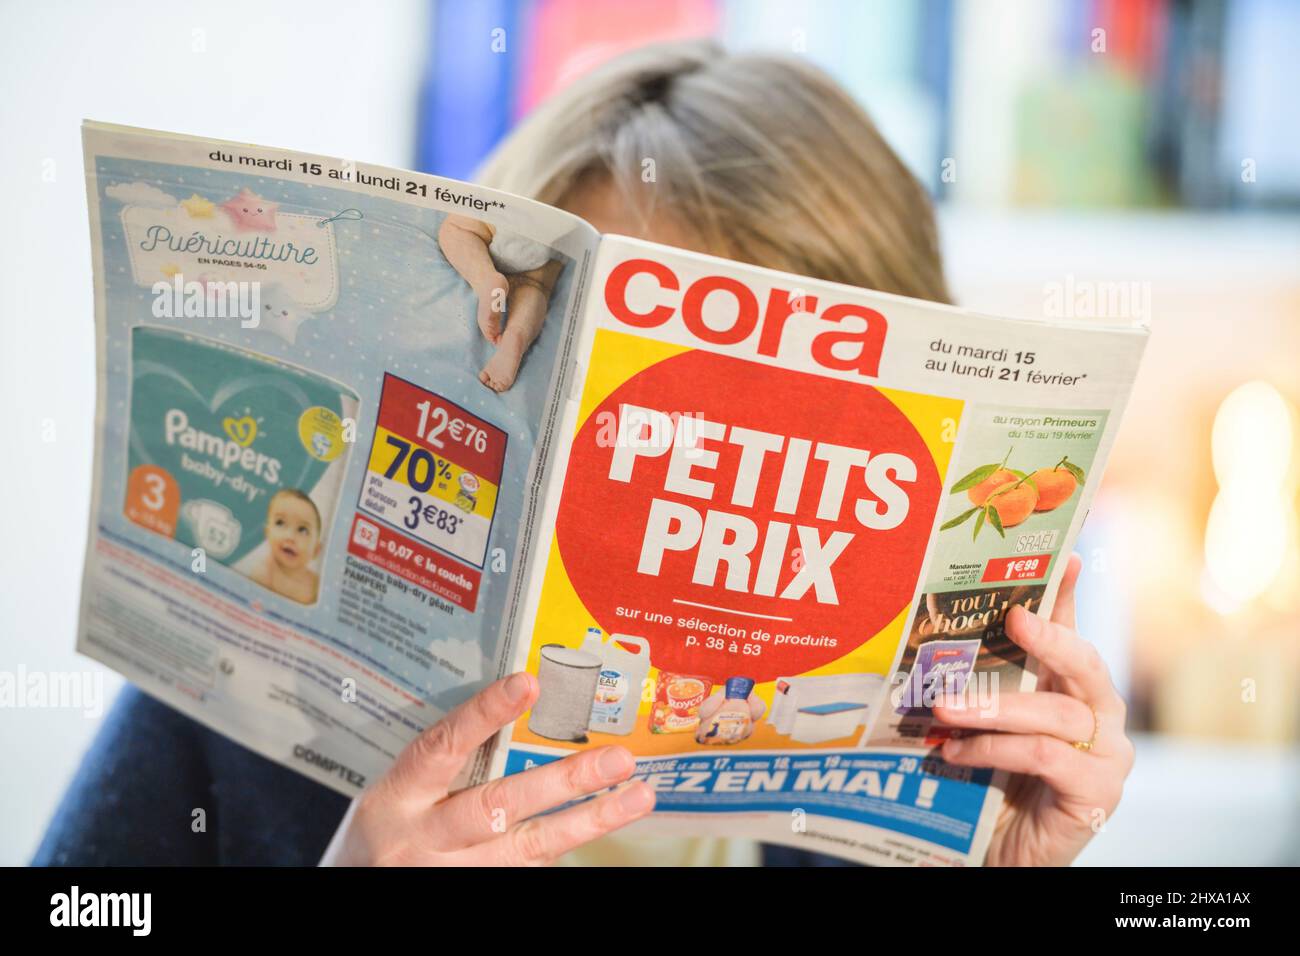 Paris, France - Feb 23, 2022: Woman reading Cora hypermarket special offer  leaflet flyer choosing best prices with large text Petit Prix translated as  Small prices Stock Photo - Alamy